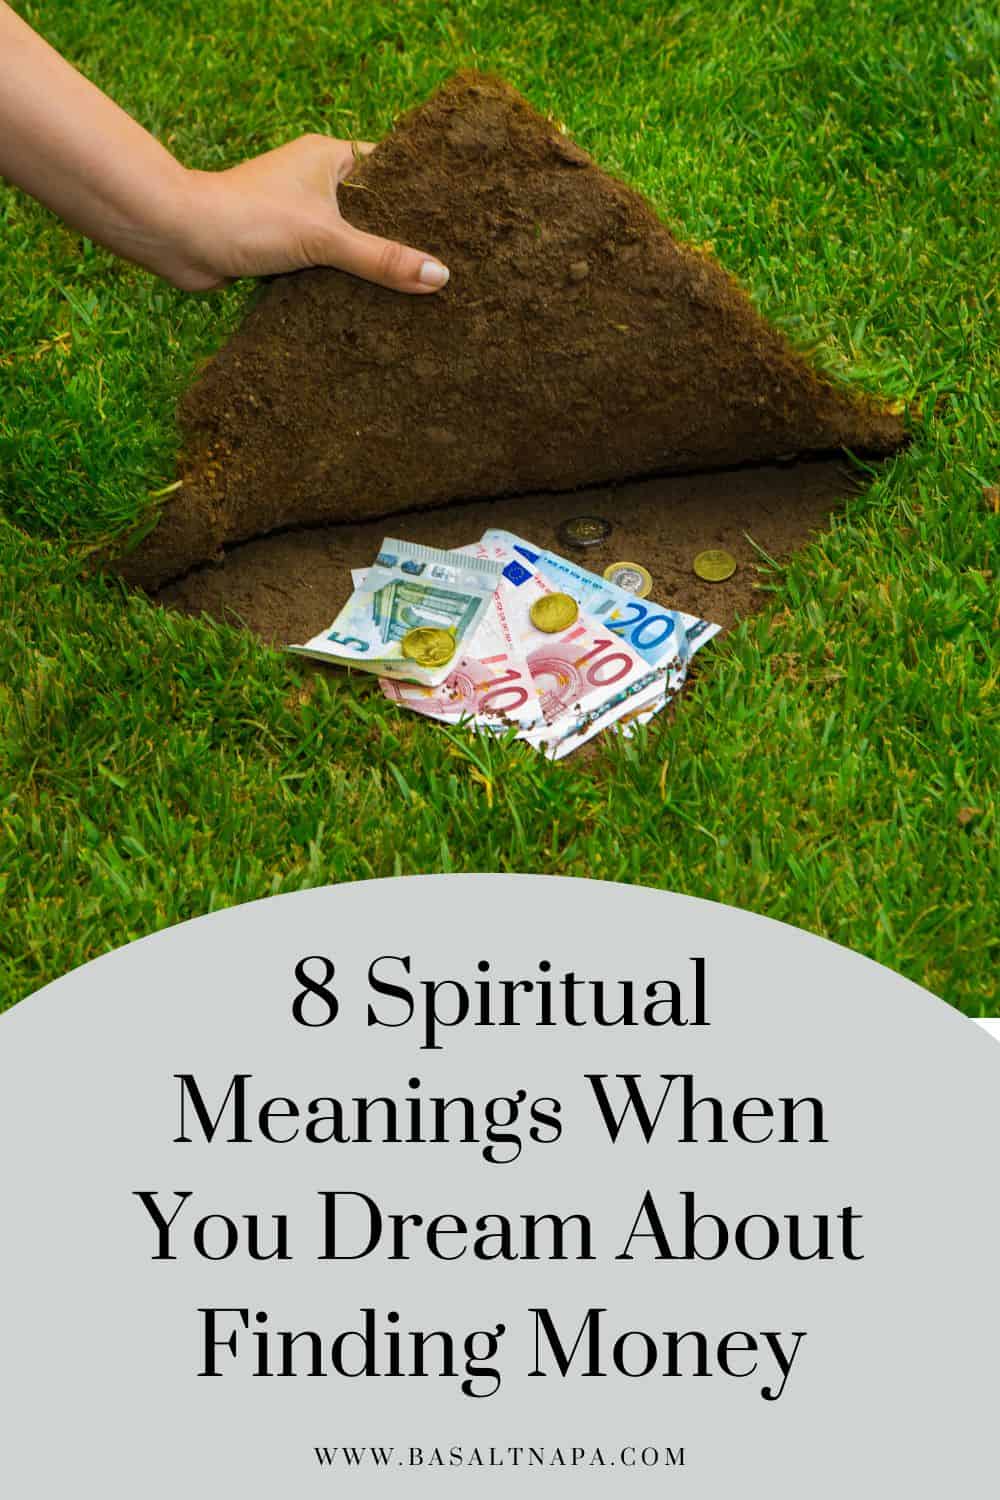 8 Spiritual Meanings When You Dream About Finding Money